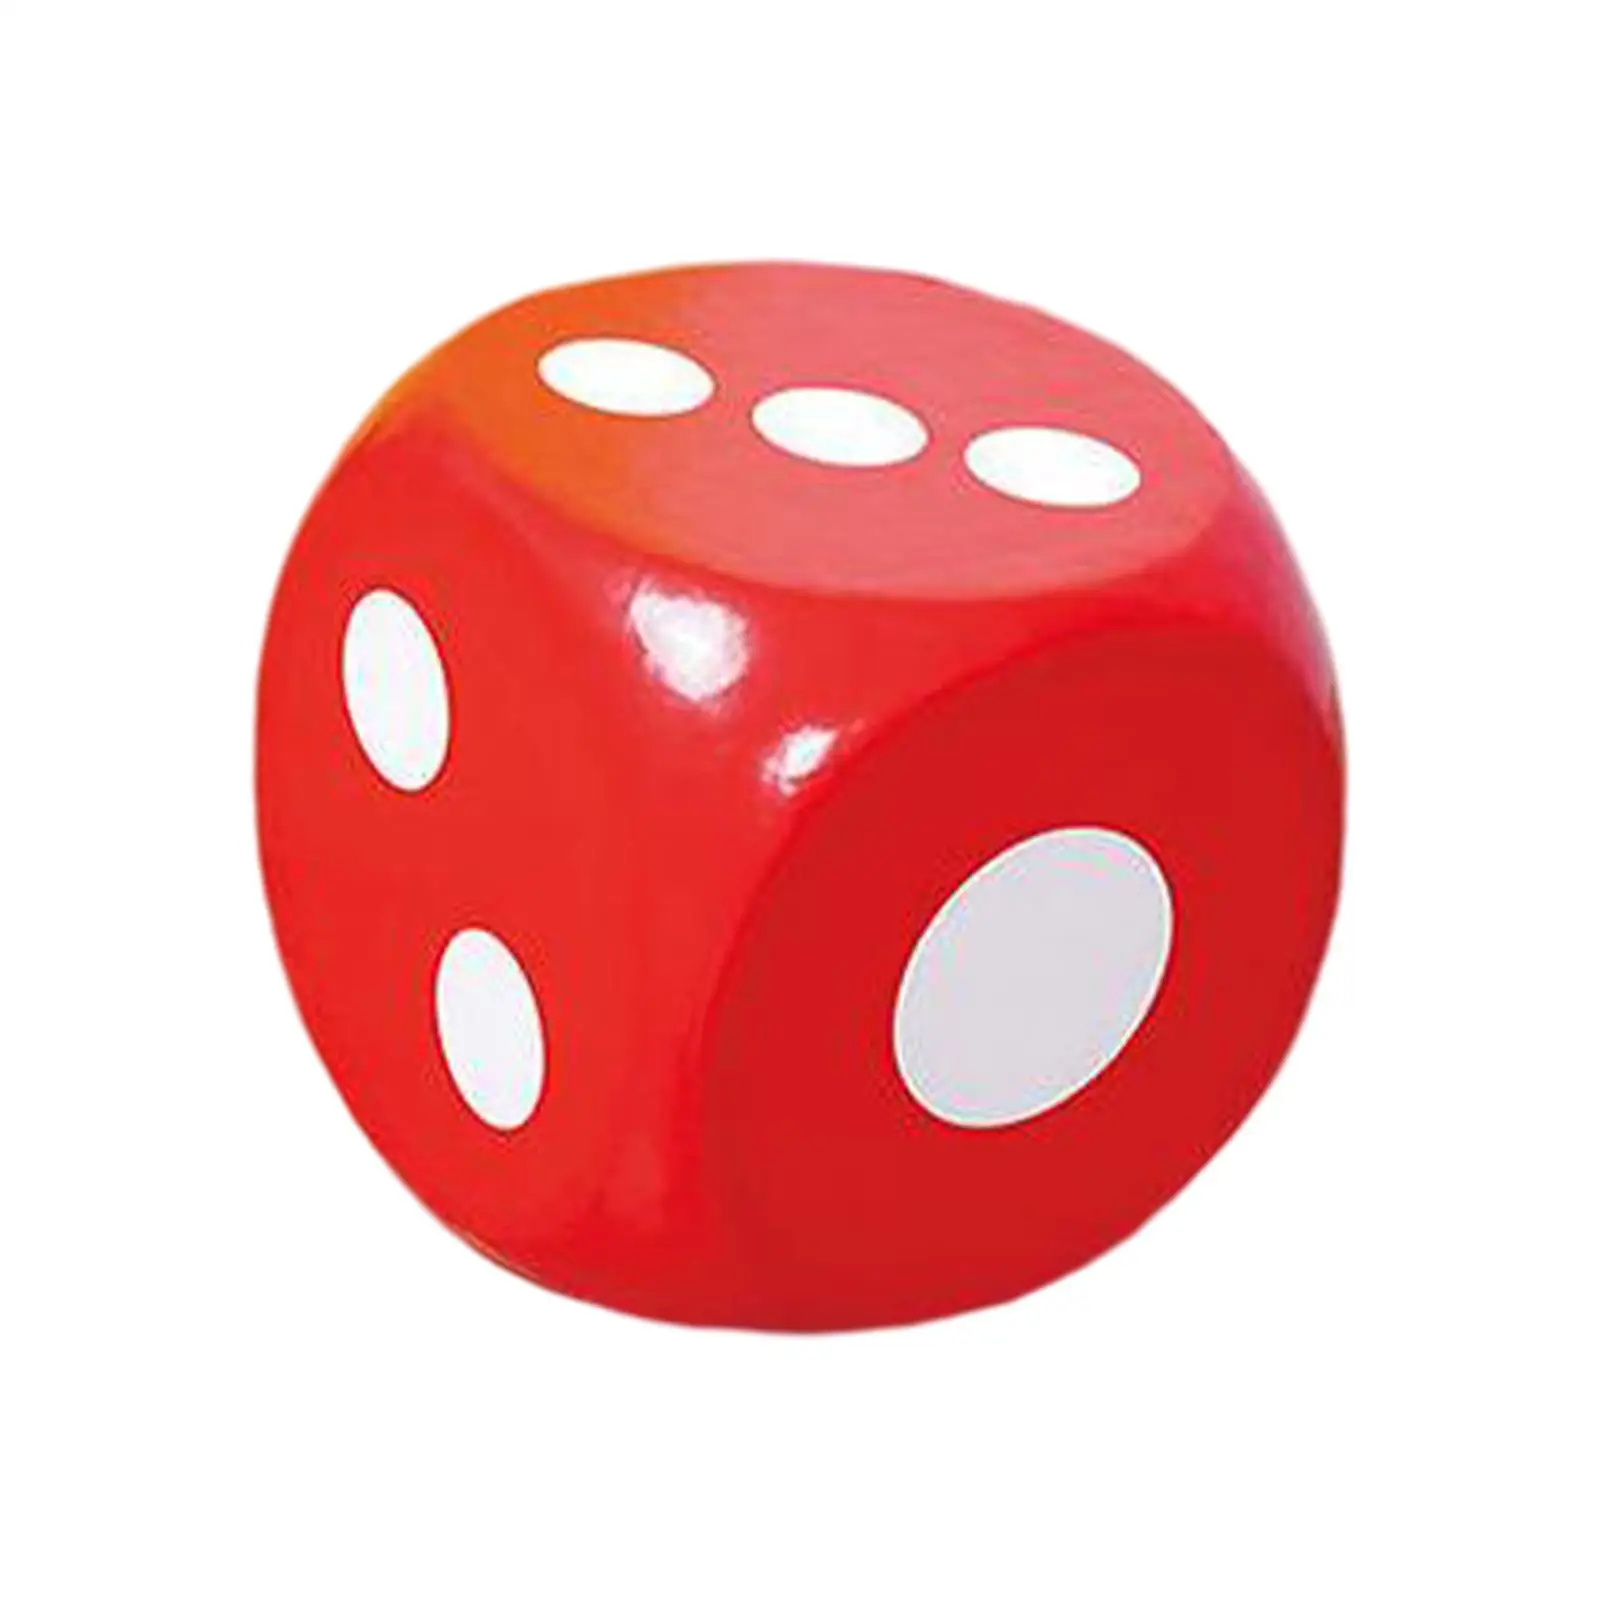 6 Sided Foam Dice Early Math Skills Early Learning Toys Dot Dice Game Dice for Children Boys and Girls Carnival School Supplies